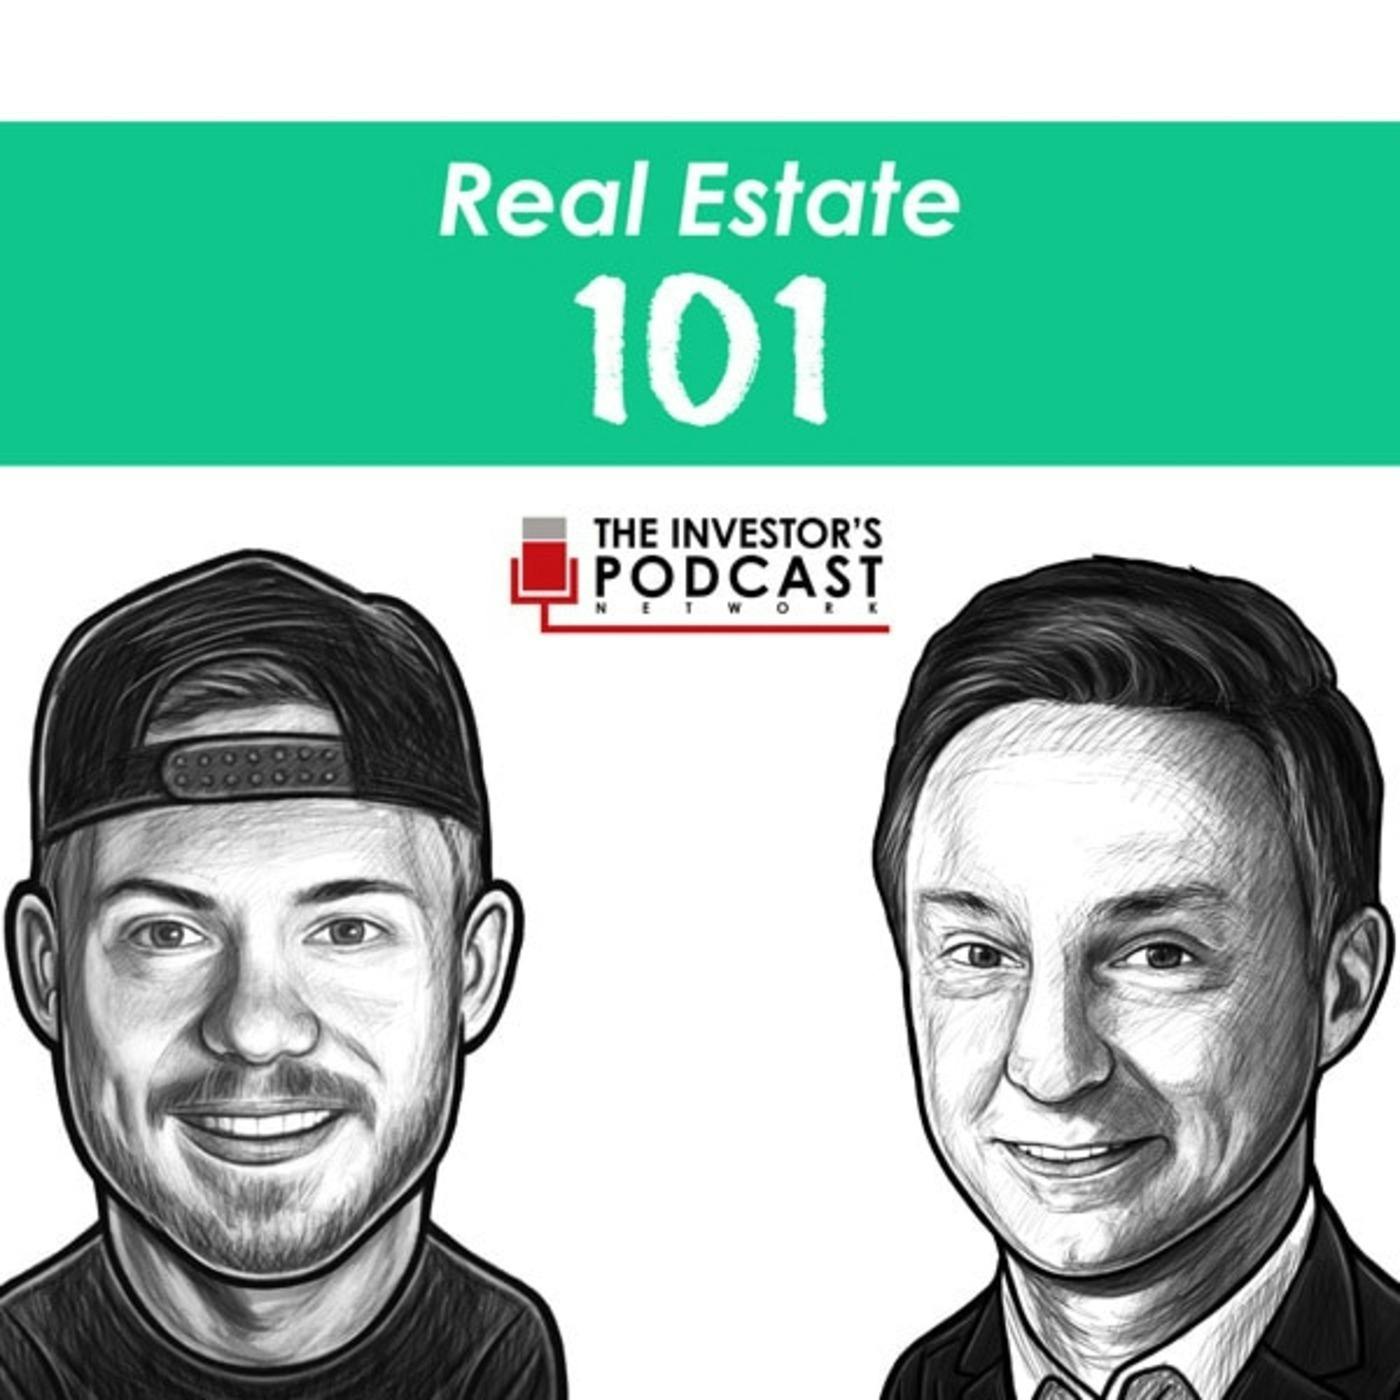 REI168: The Road to Commercial Real Estate Success w/ Matt Lasky